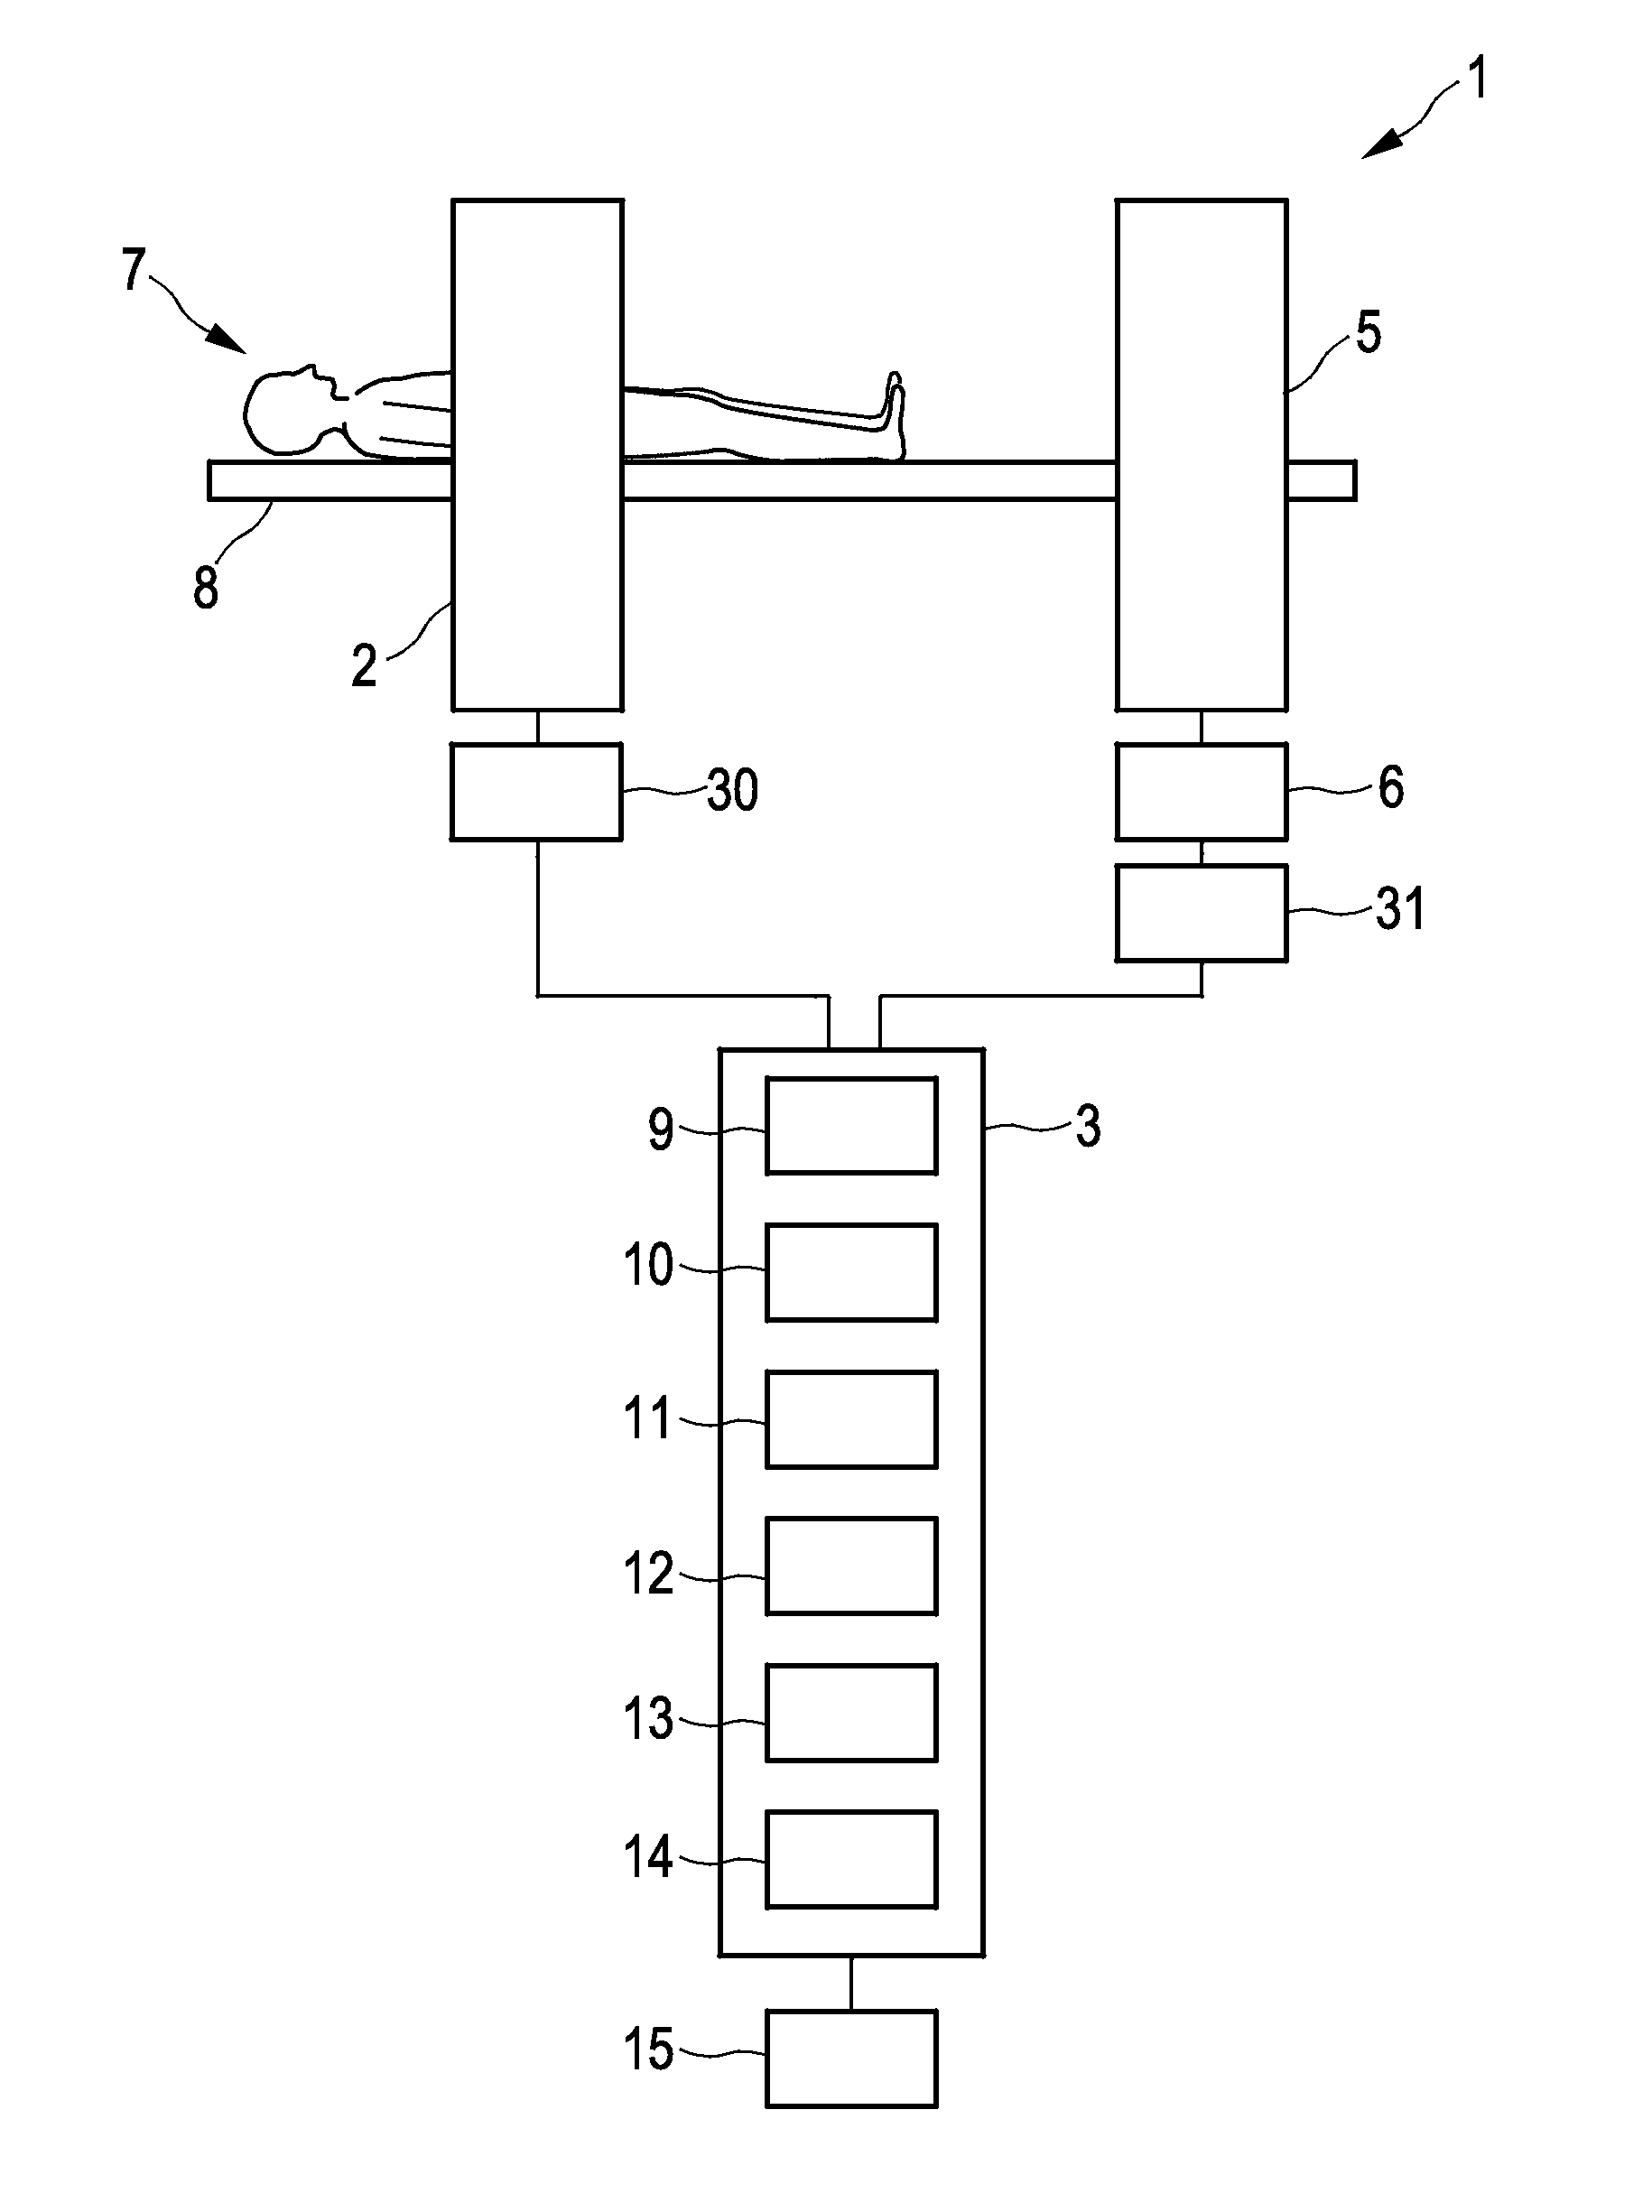 Apparatus for generating assignments between image regions of an image and element classes